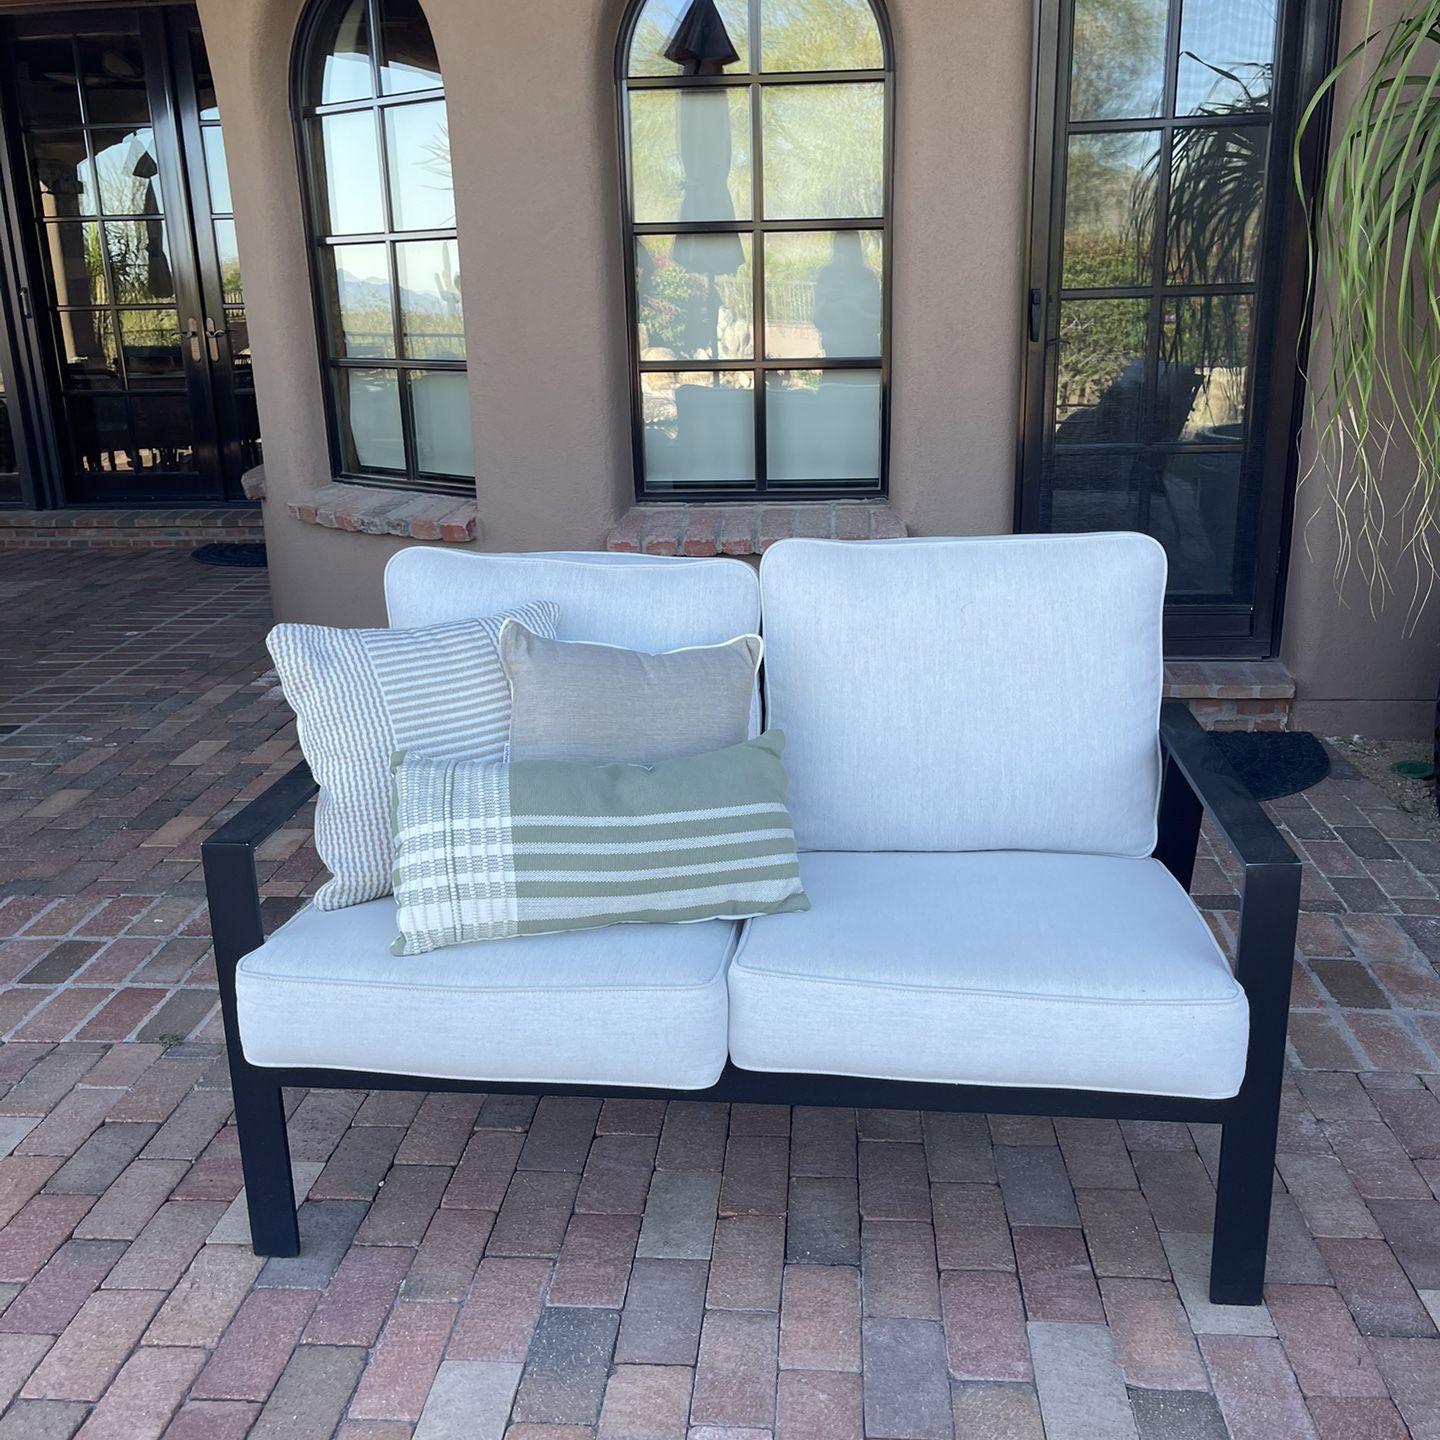 Outdoor Love Seat ** OR** $250 Each 